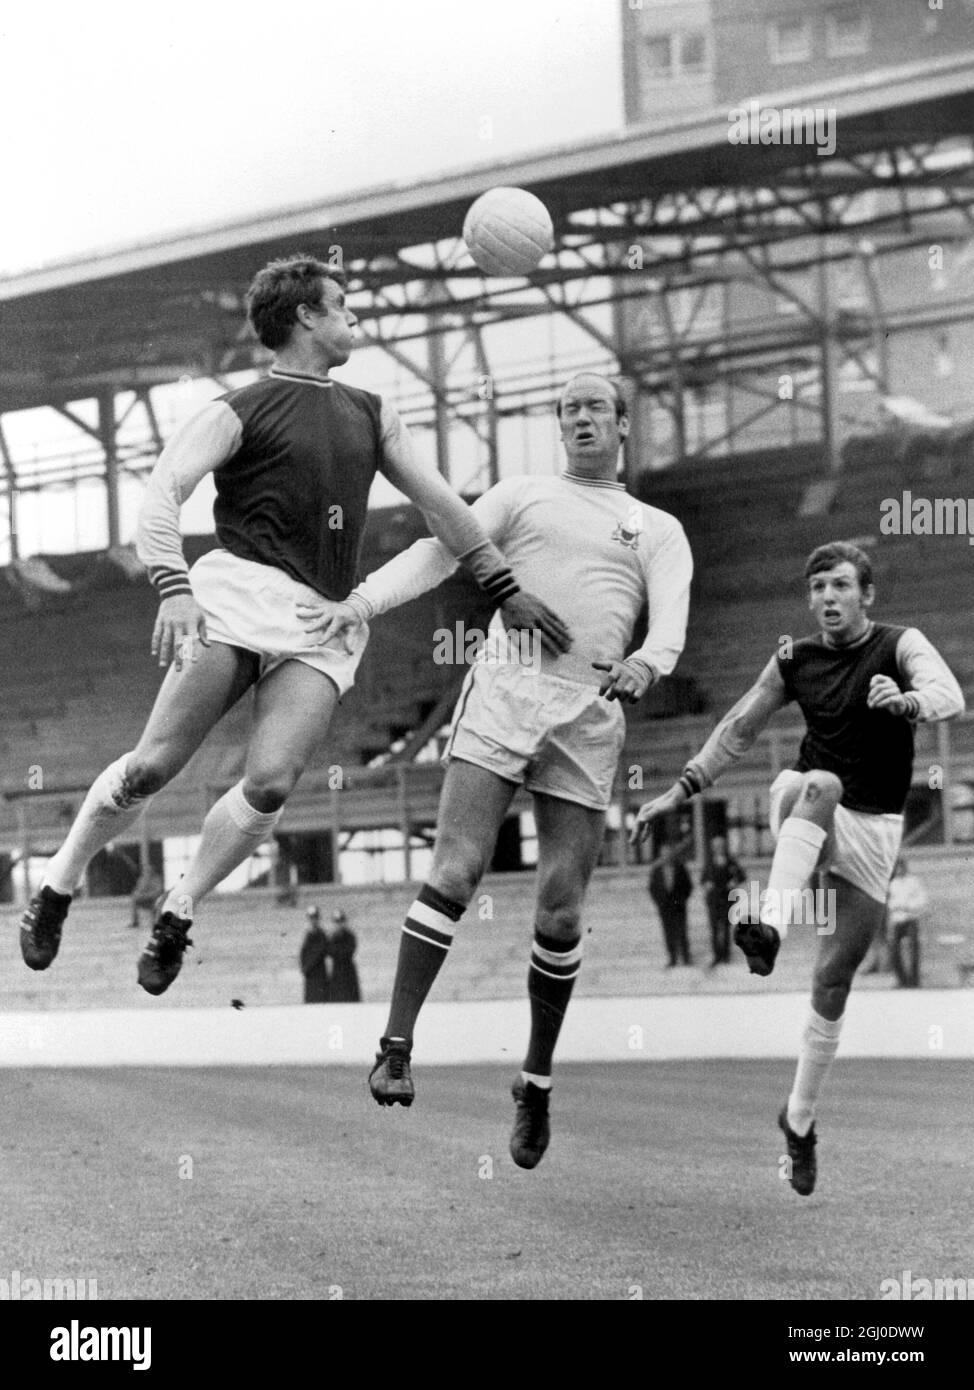 West Ham Utd v Nottingham Forest Nottingham Forest right half Terry Hennessey is challenged for the ball by two West Ham players, Geoff Hurst (left) and Martin Peters. 17th August 1968. Stock Photo